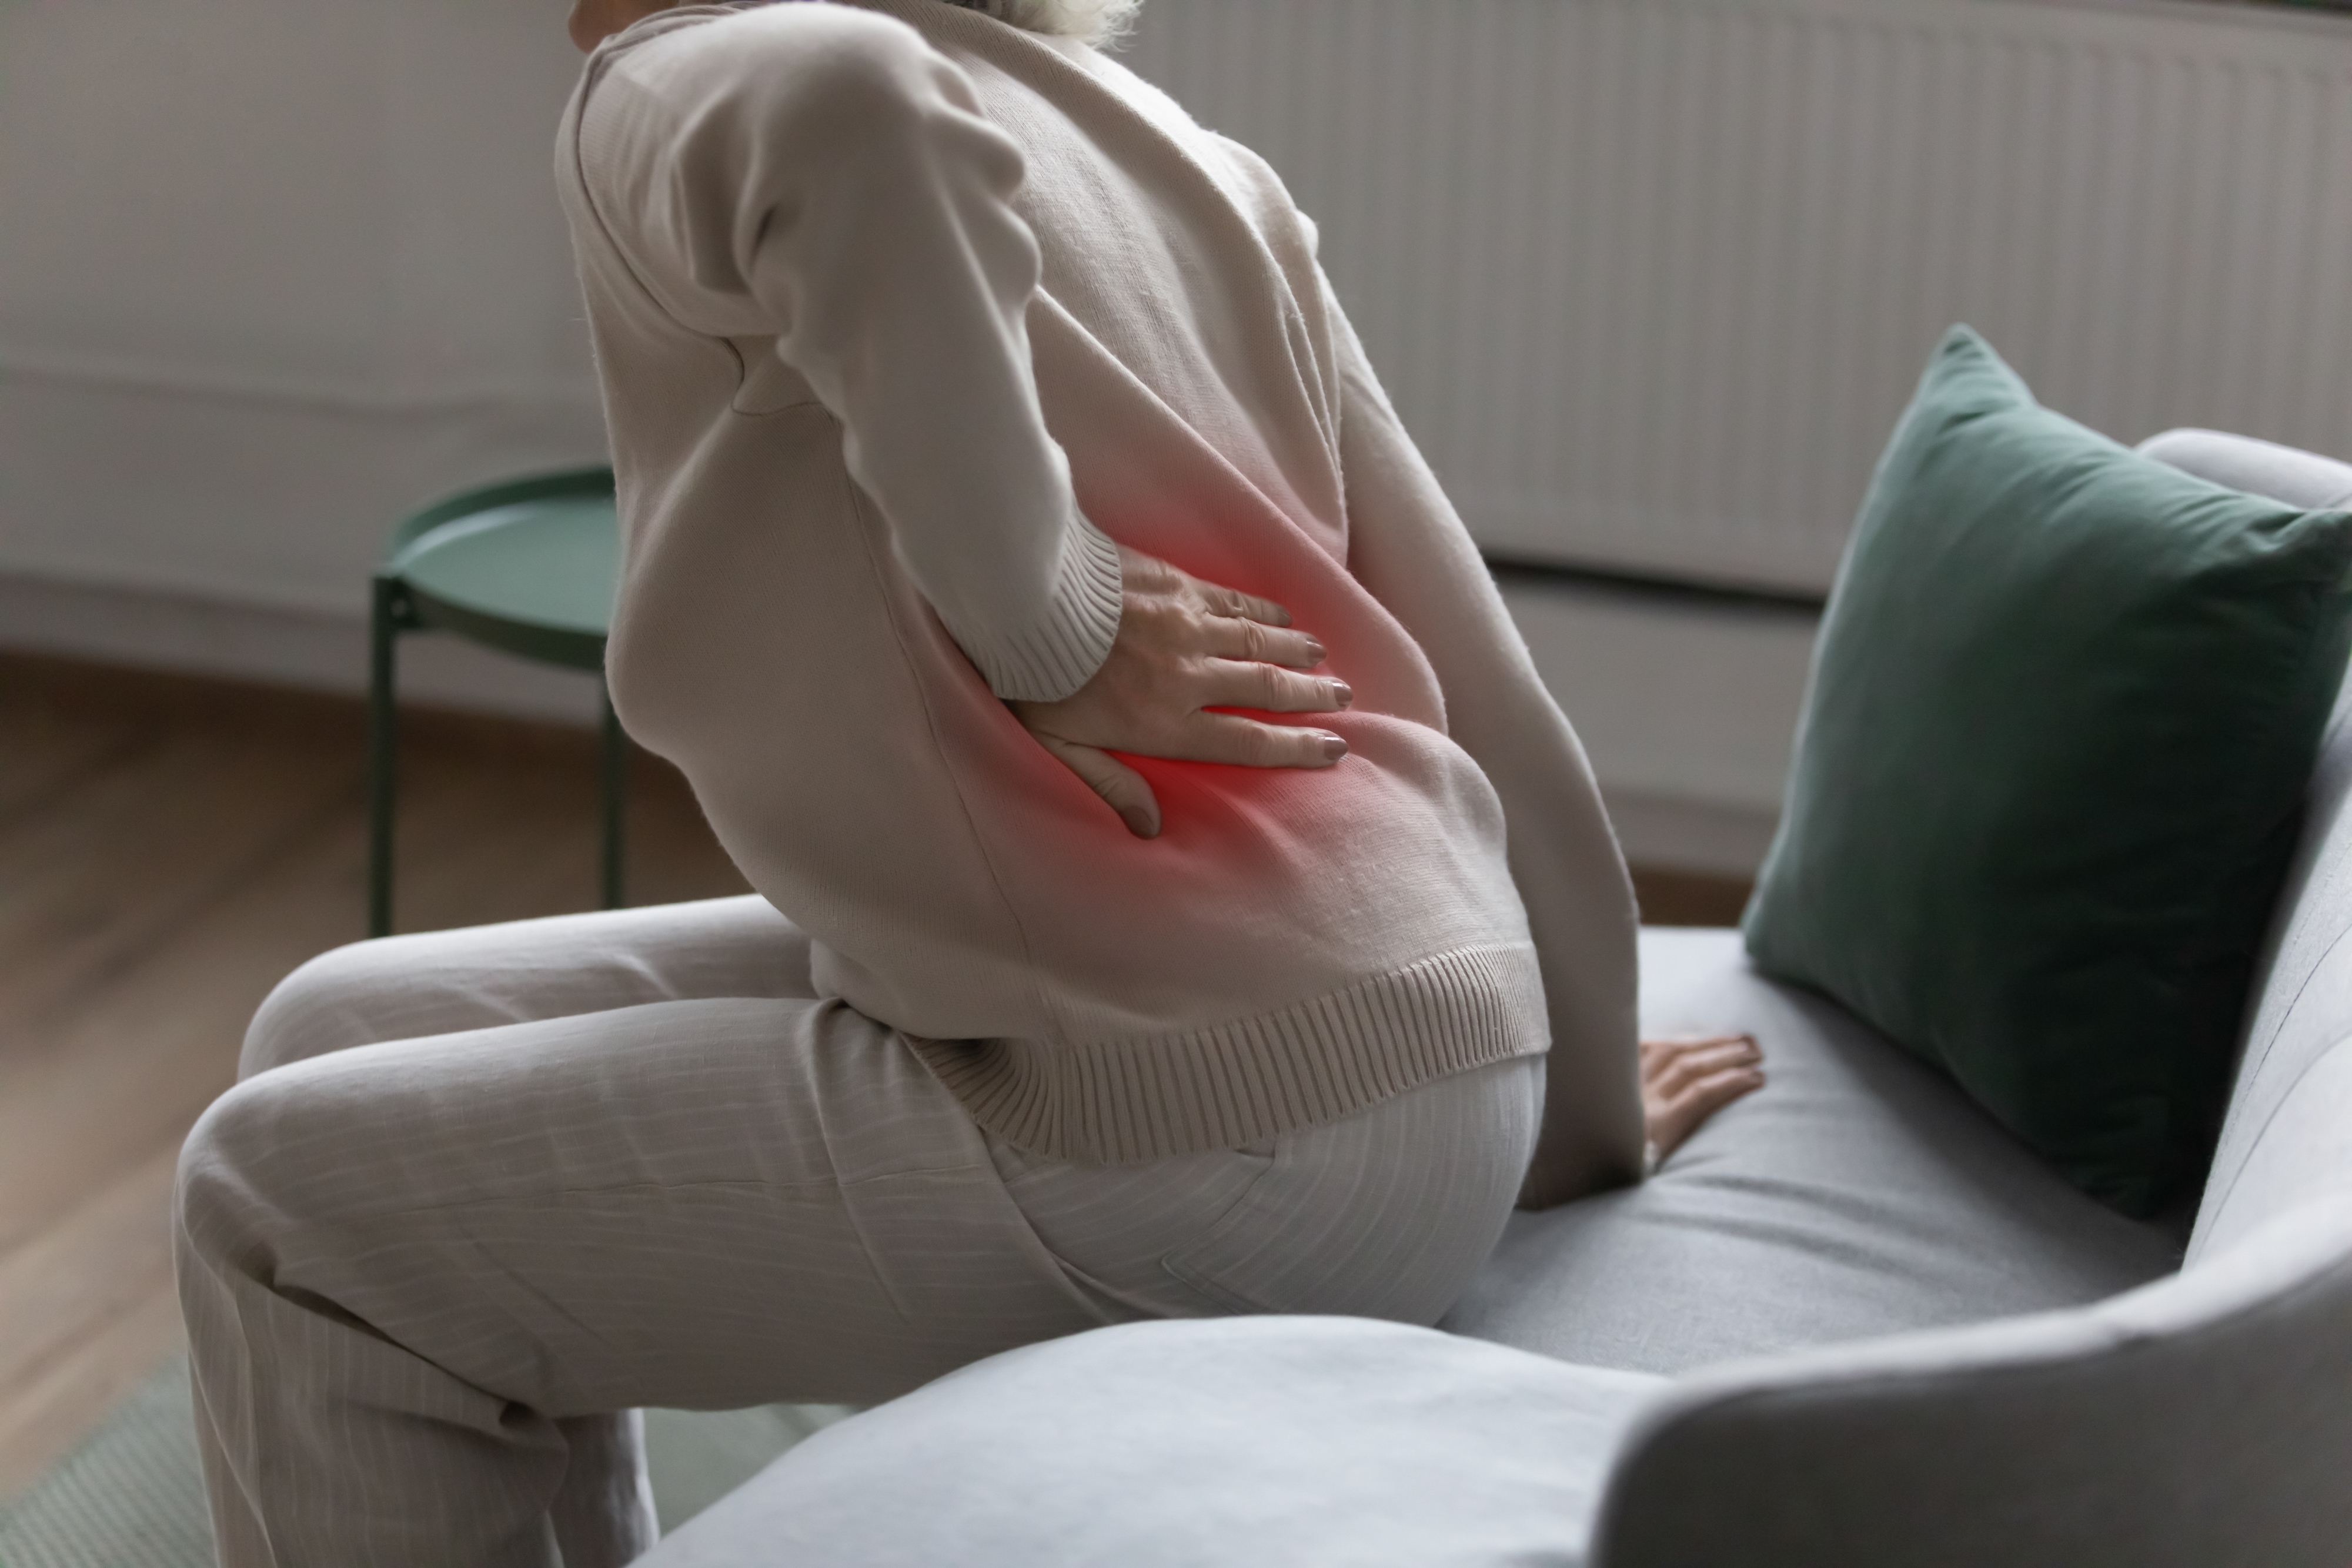 Icy Joints: How Winter Impacts Bone Pain in Arthritis Sufferers